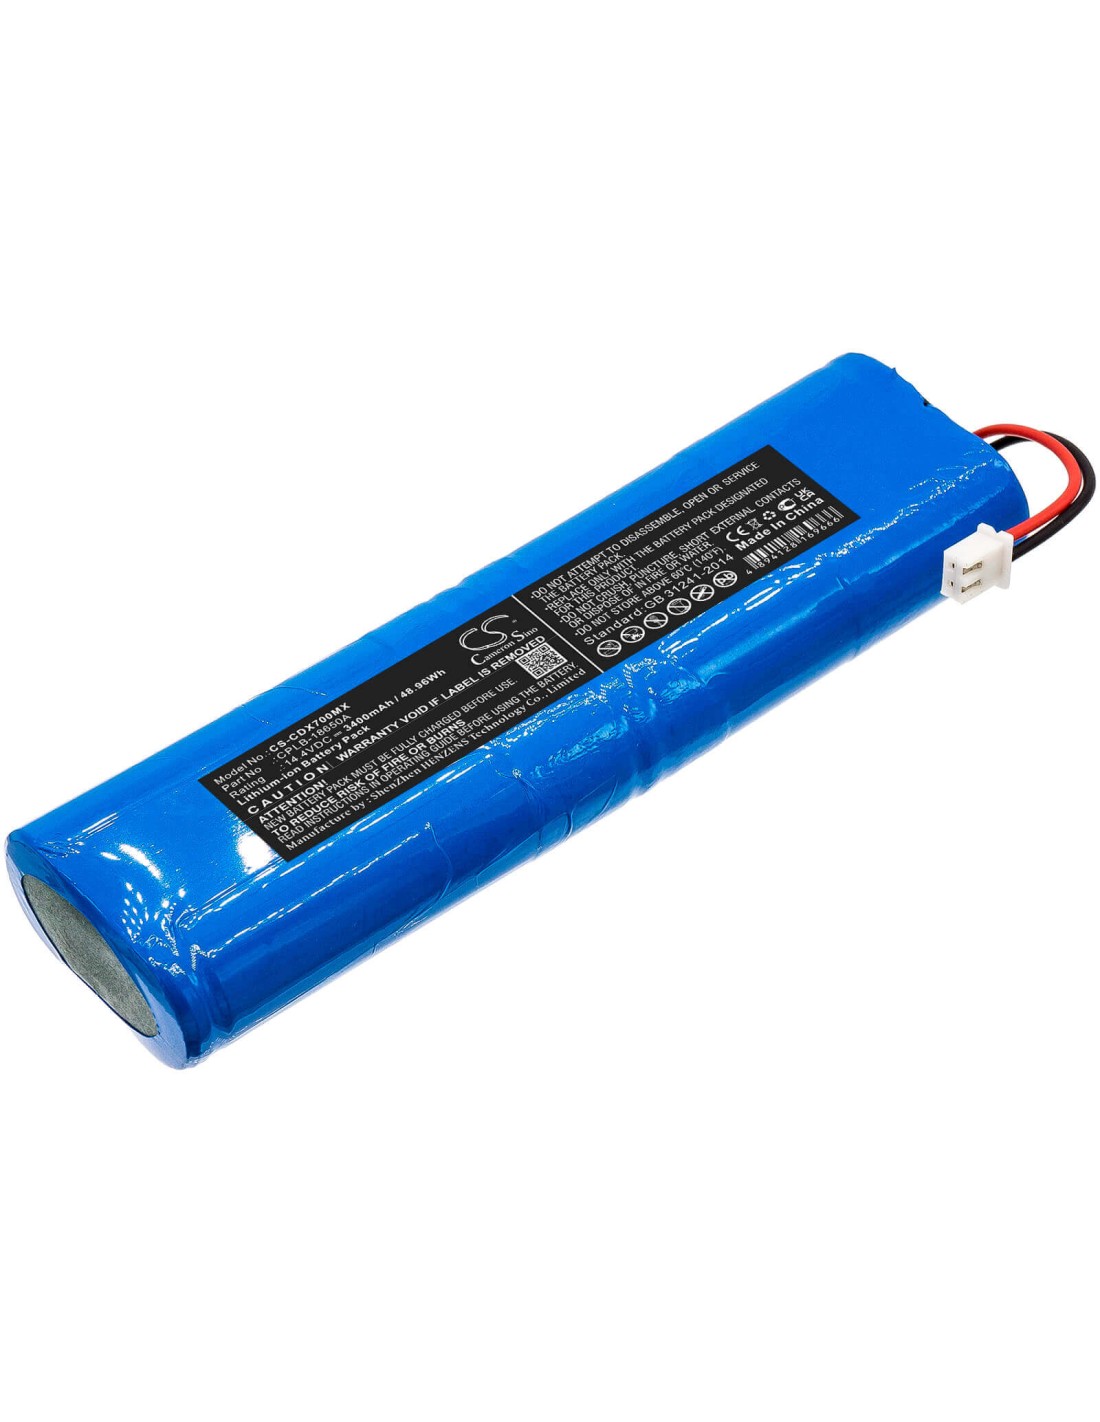 Battery for Creative, Deluxe-70 14.4V, 3400mAh - 48.96Wh